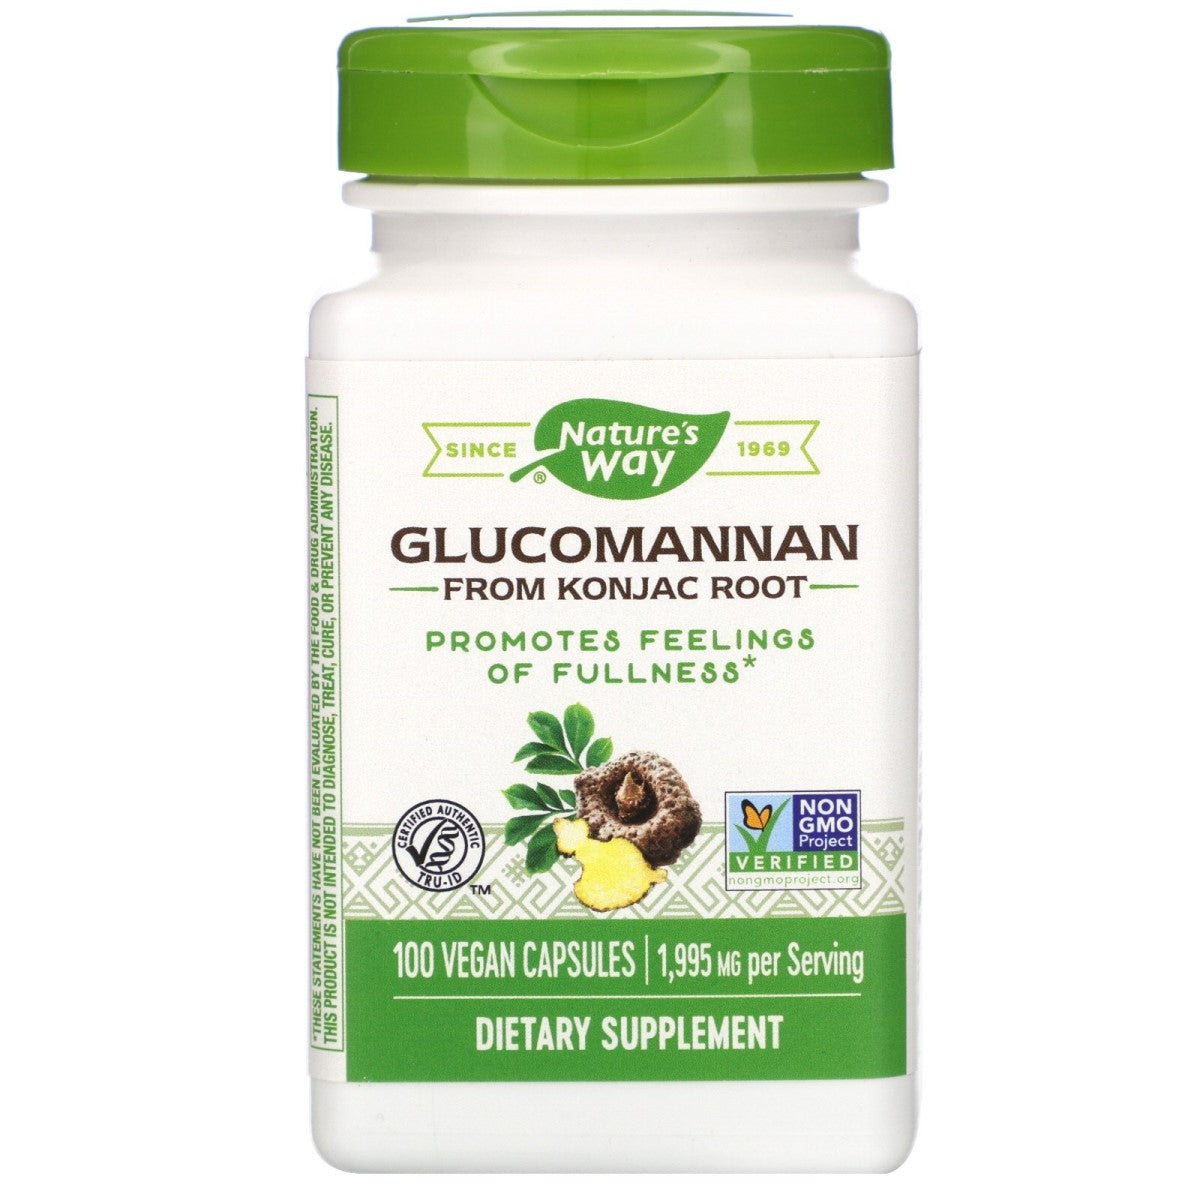 Primary image of Glucomannan